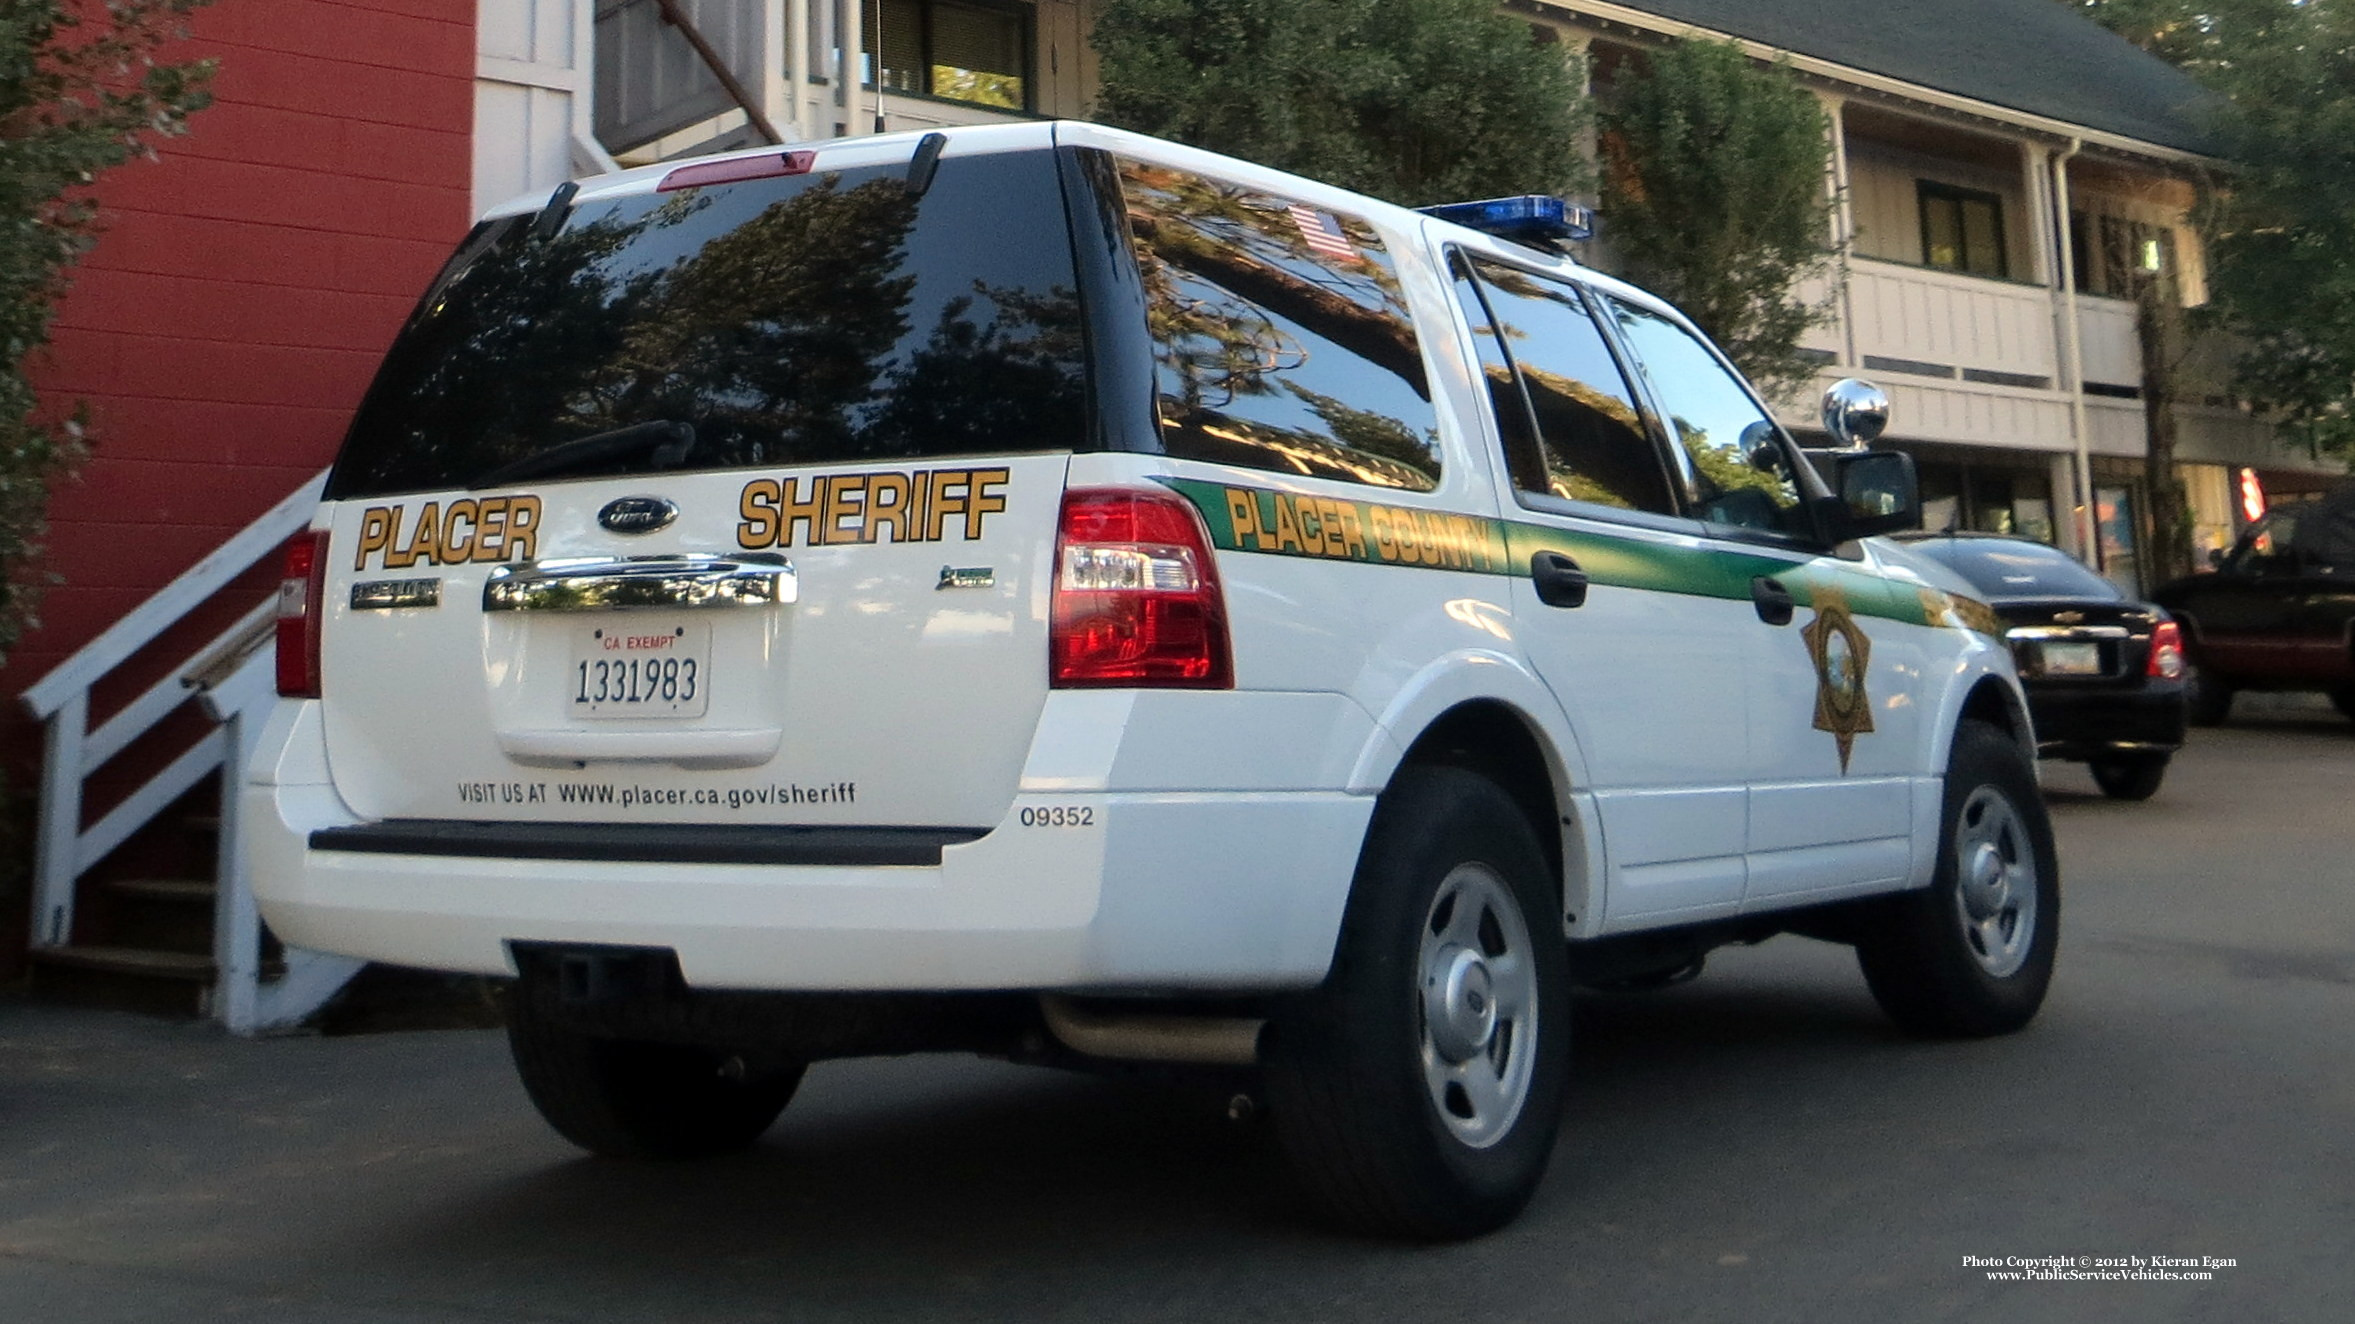 A photo  of Placer County Sheriff
            Cruiser 352, a 2009 Ford Expedition             taken by Kieran Egan